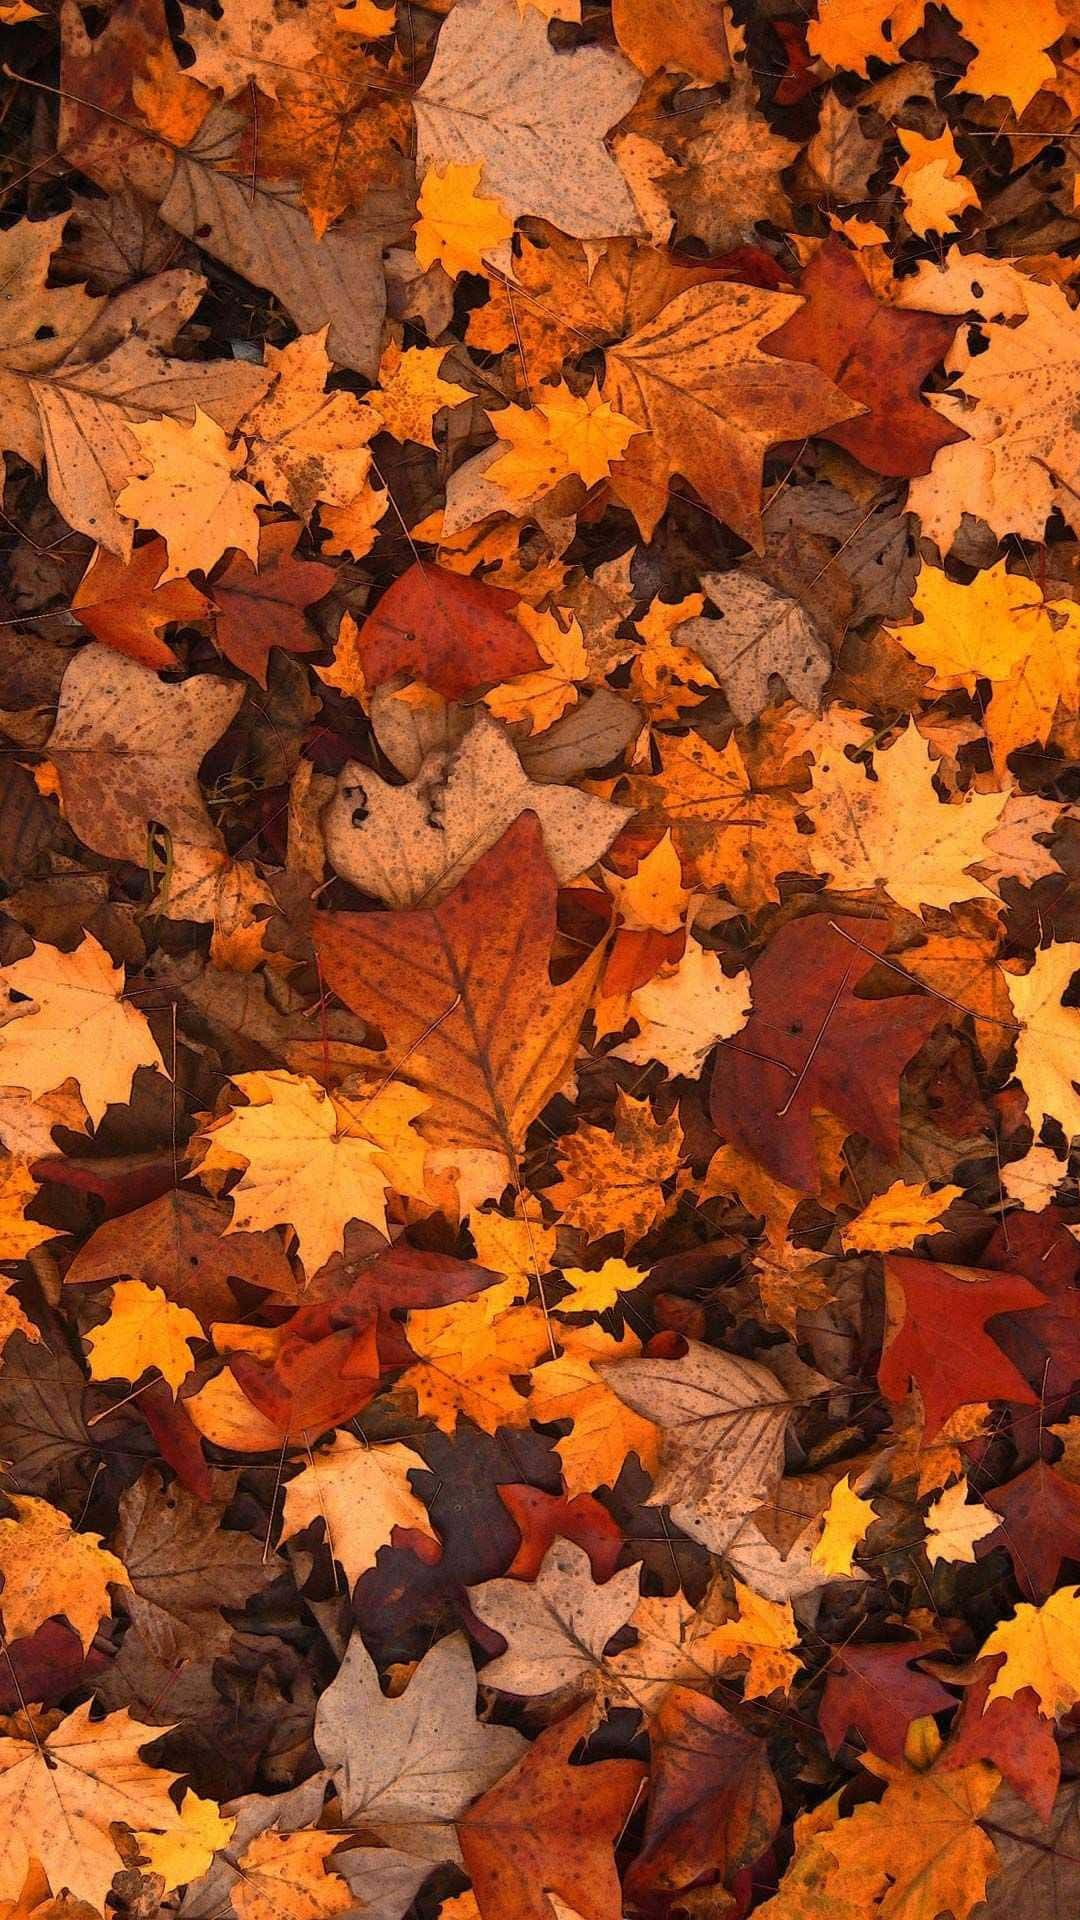 Cute Autumn iPhone Wallpapers - Wallpaper Cave